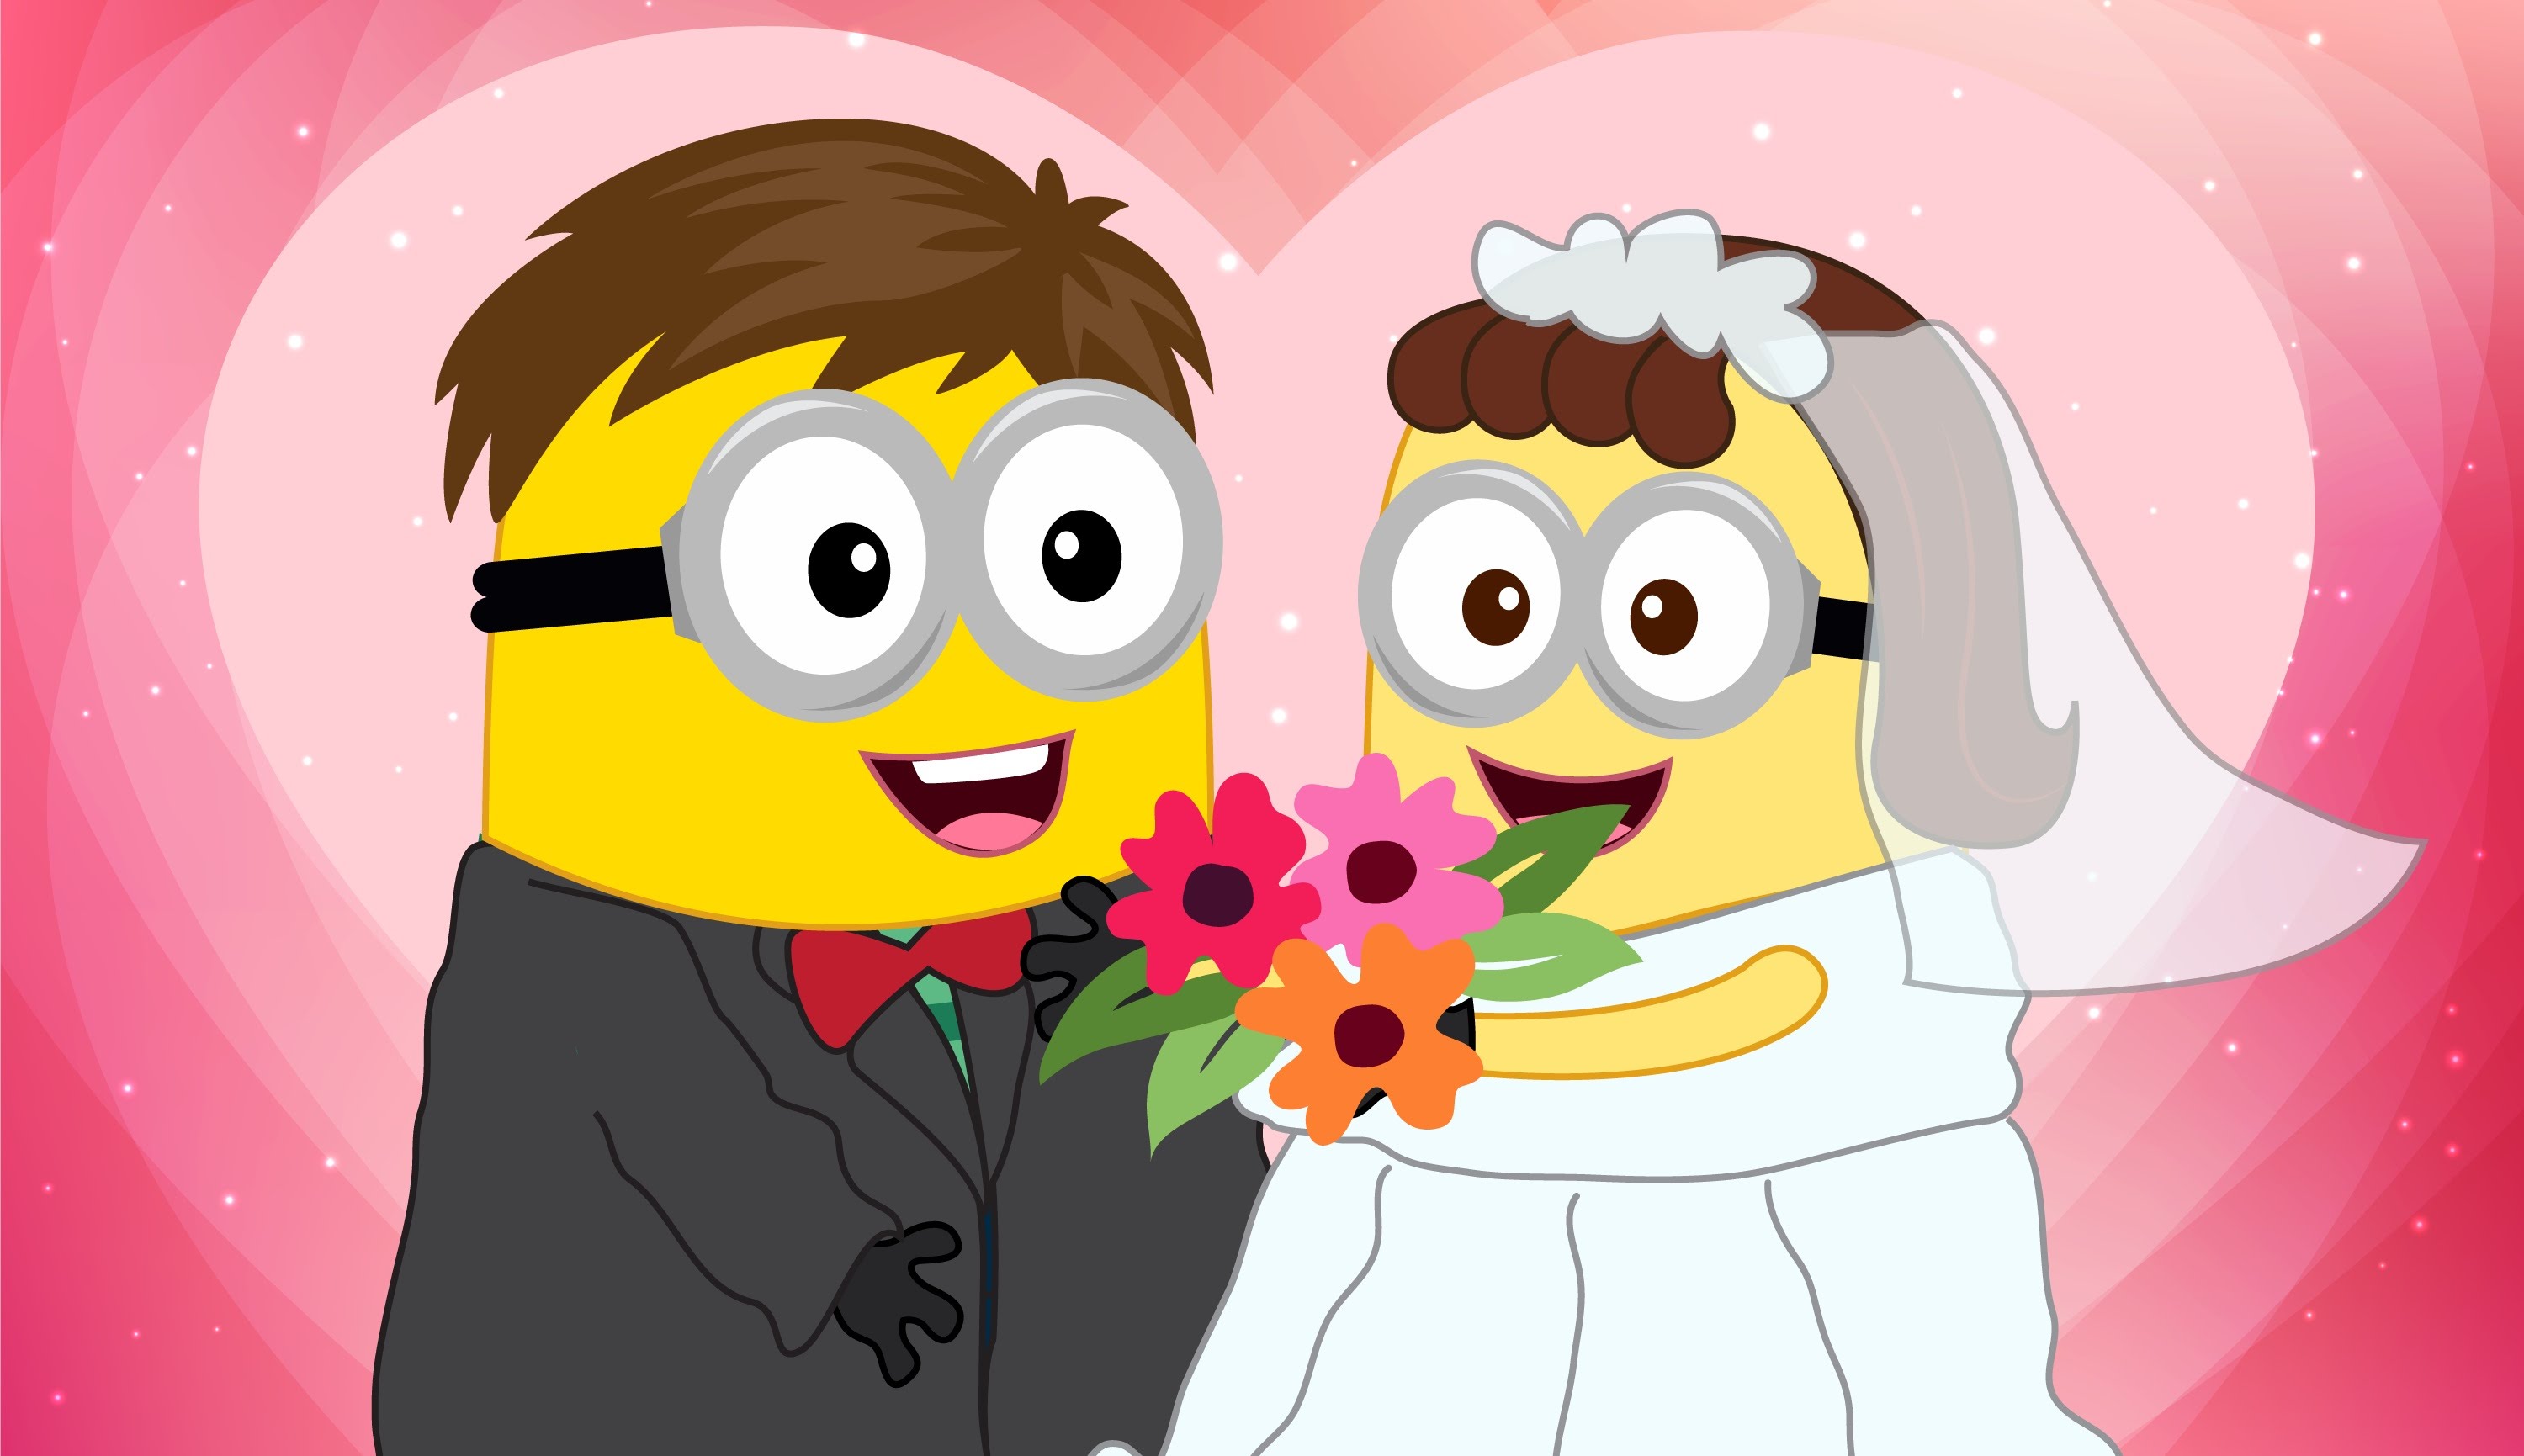 Minions Banana And his Girl Friend Do Wedding Play Full Movie! Finger Family Song Nursery Rhymes